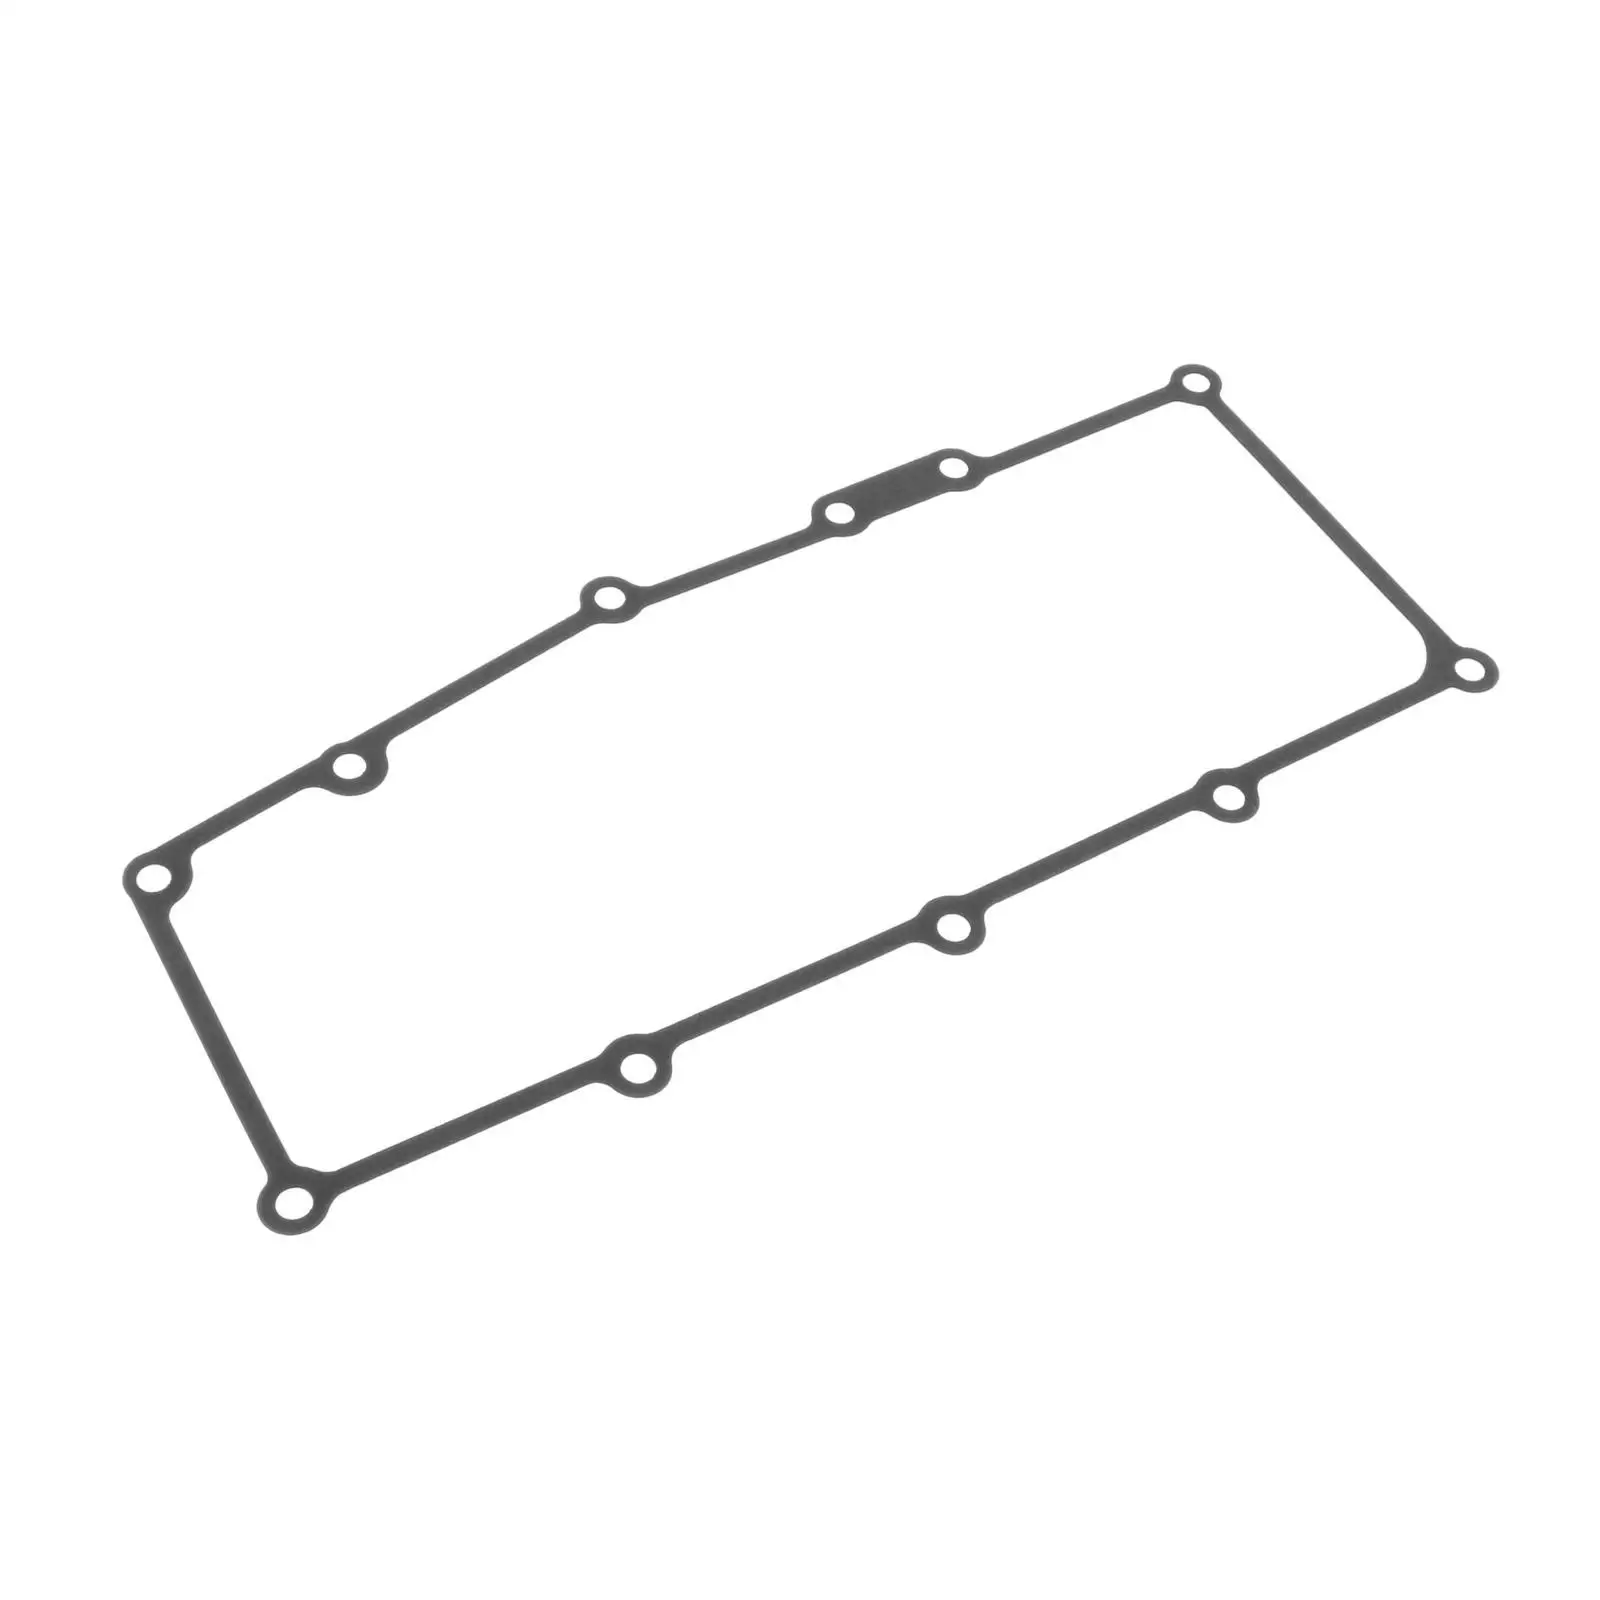 Crankcase Water Intake Gasket Compatible with  Boat FX FZ 6BH-13557-00 Replacement Parts  Install Durable